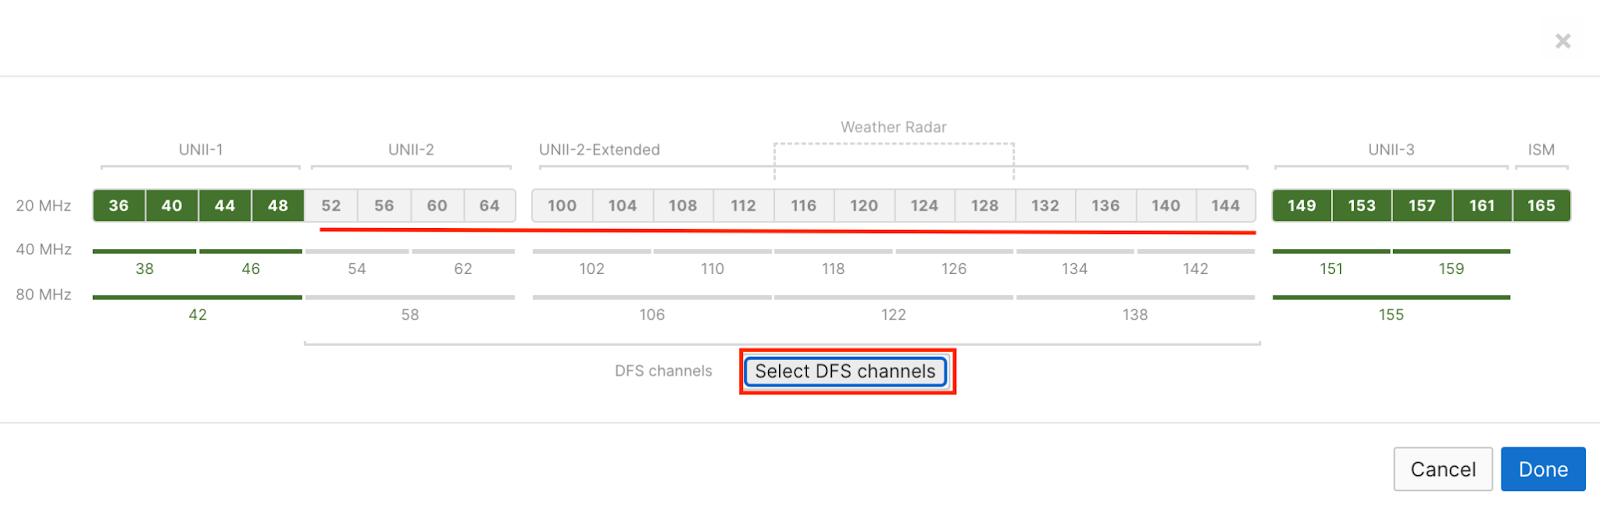 Dashboard UI radio settings in manual channel assignment showing selection of specific channel numbers 